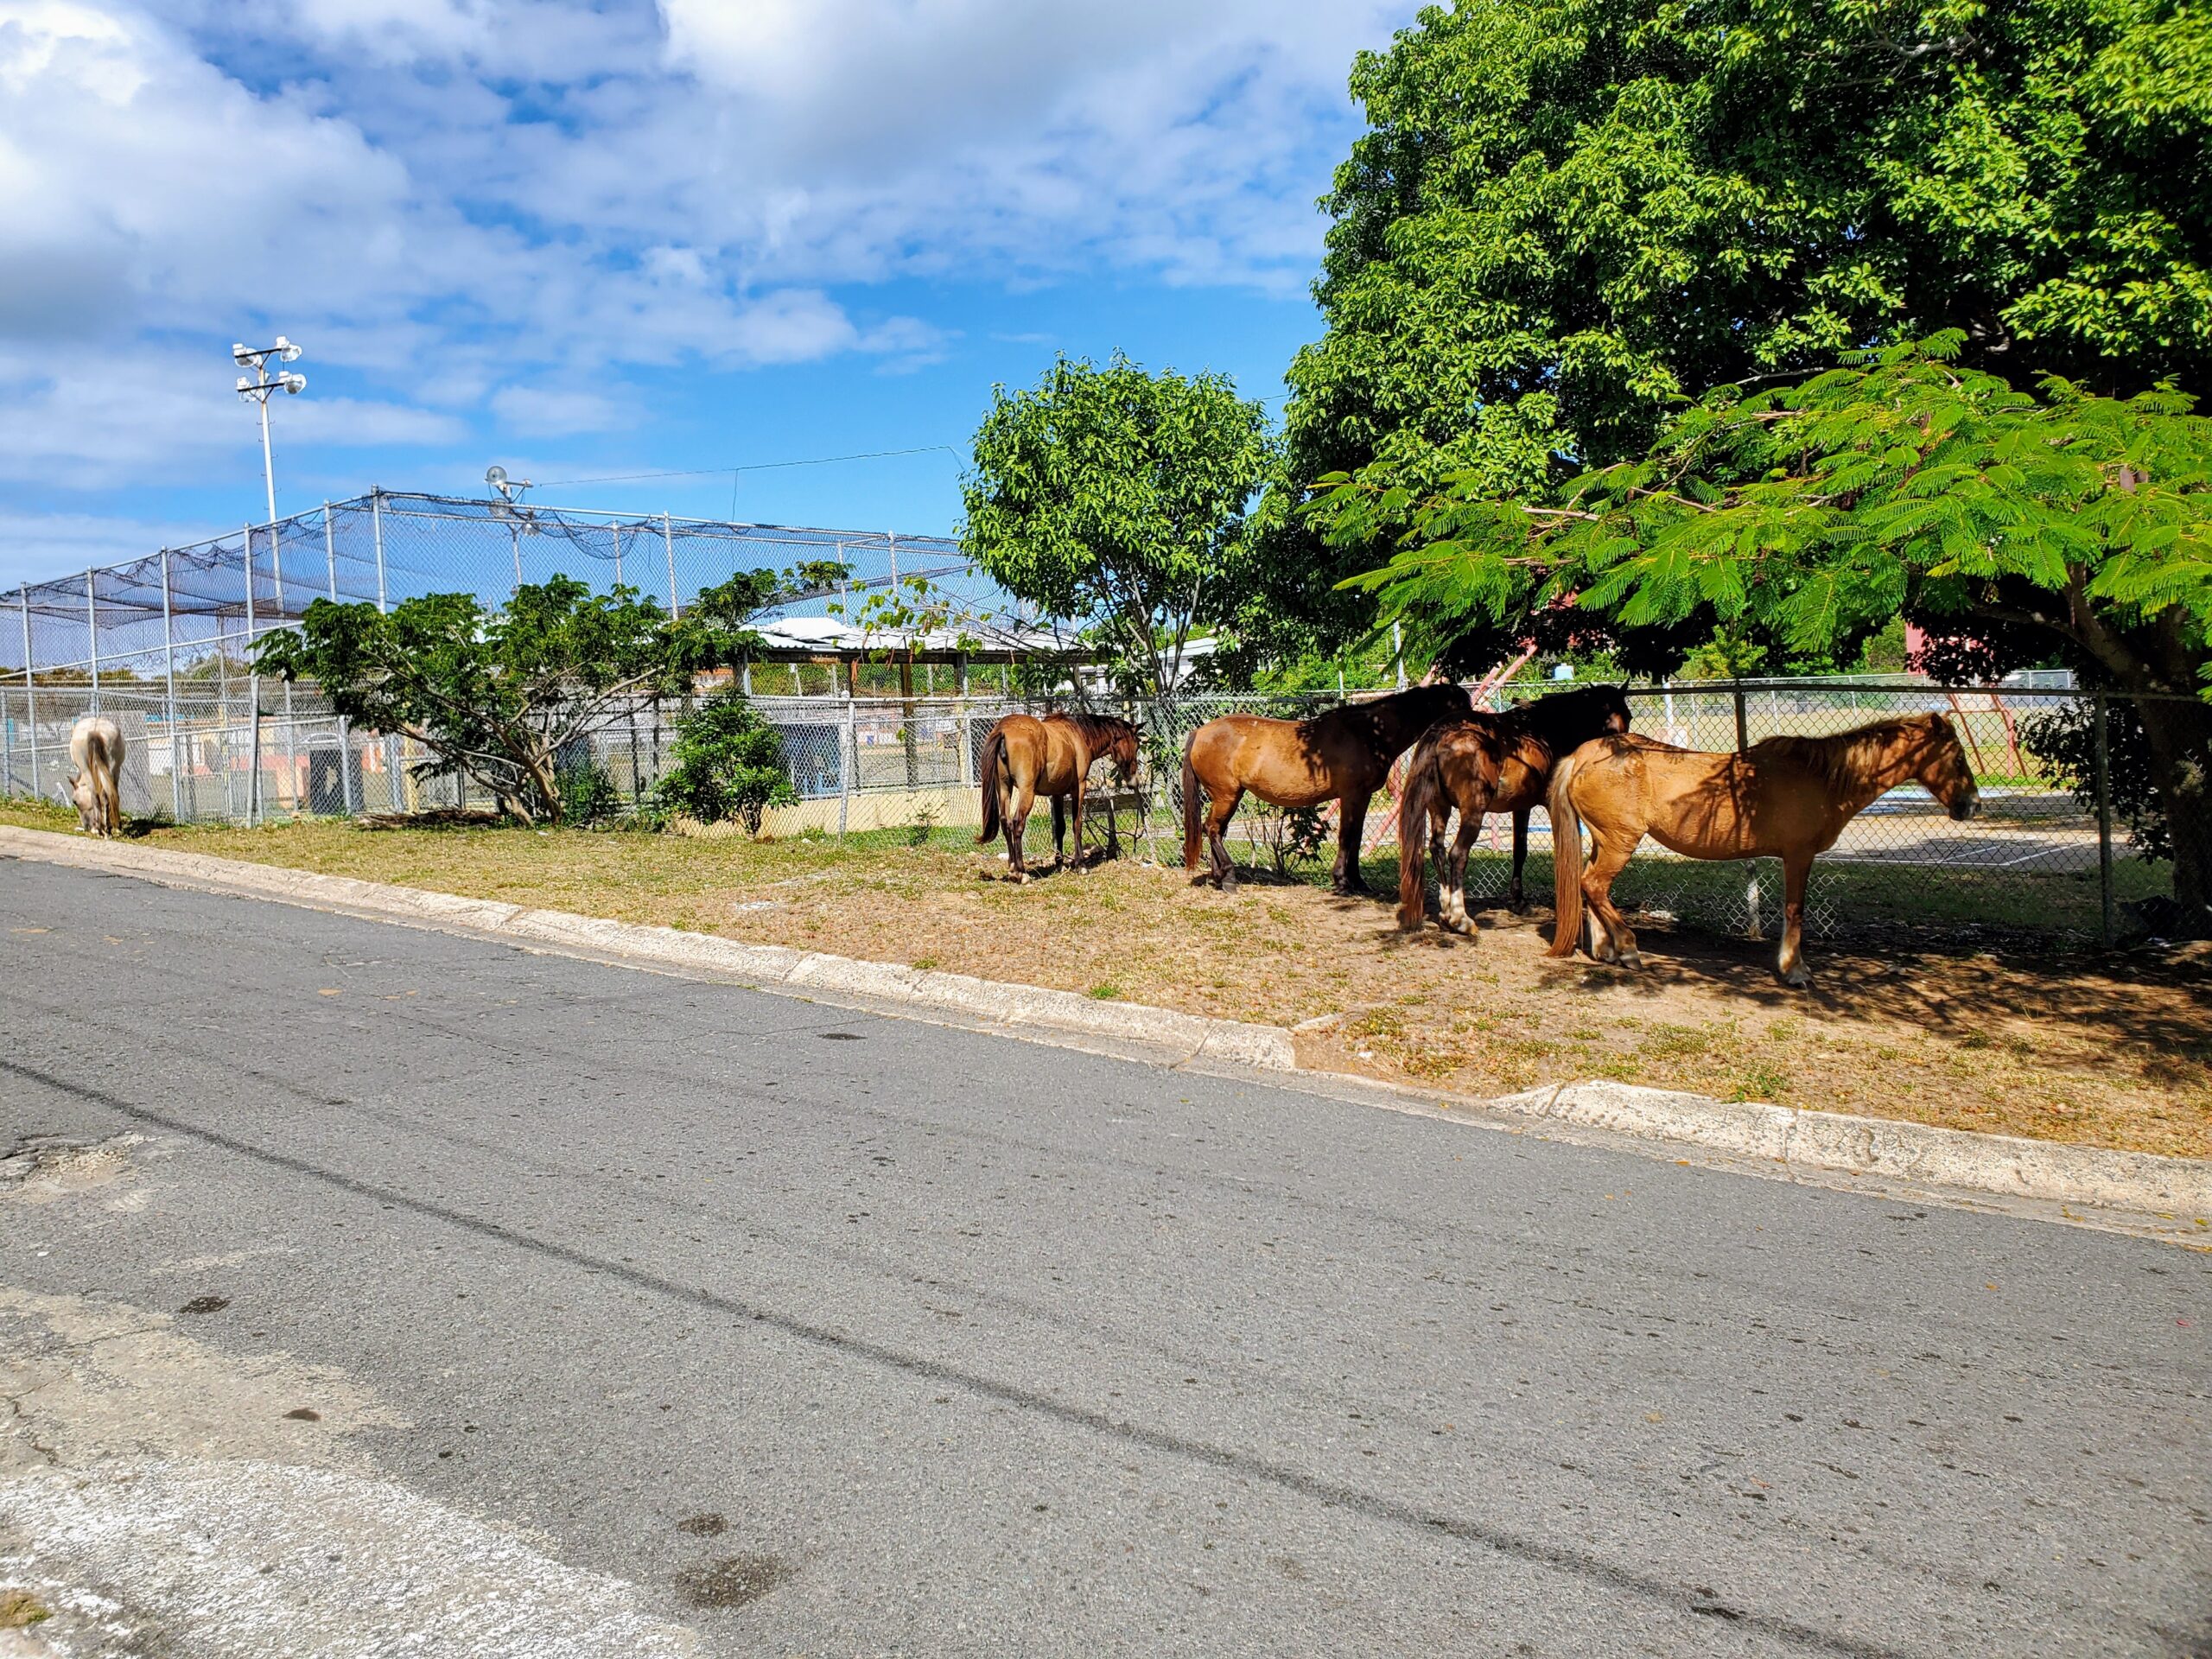 Four wild horses pause in the shade by the side of the street.